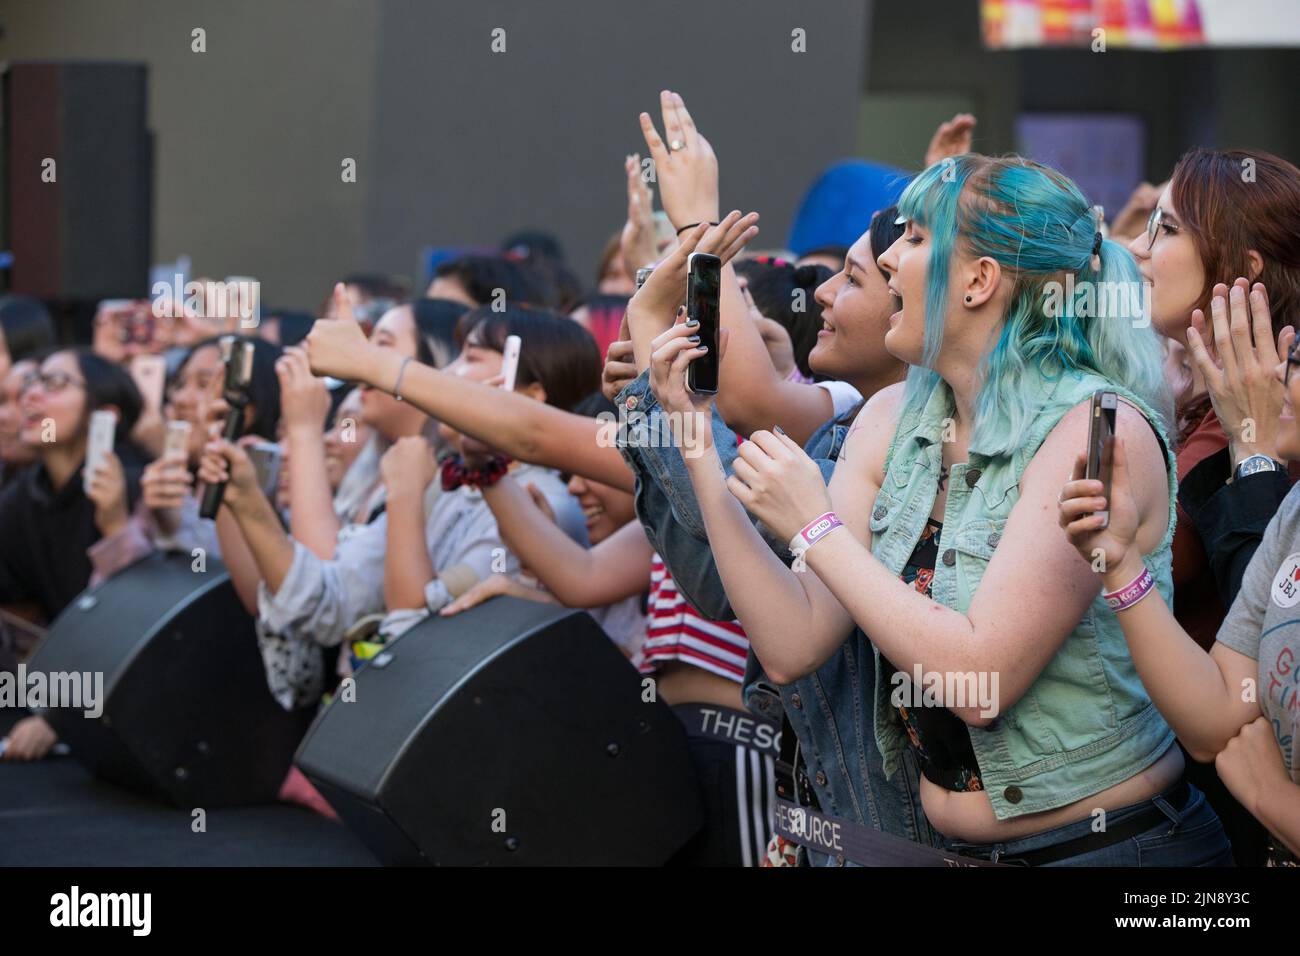 The fans of South Korean K-Pop Music enjoying and taking pictures of 'Random Dance Play' at Buena Park, US Stock Photo